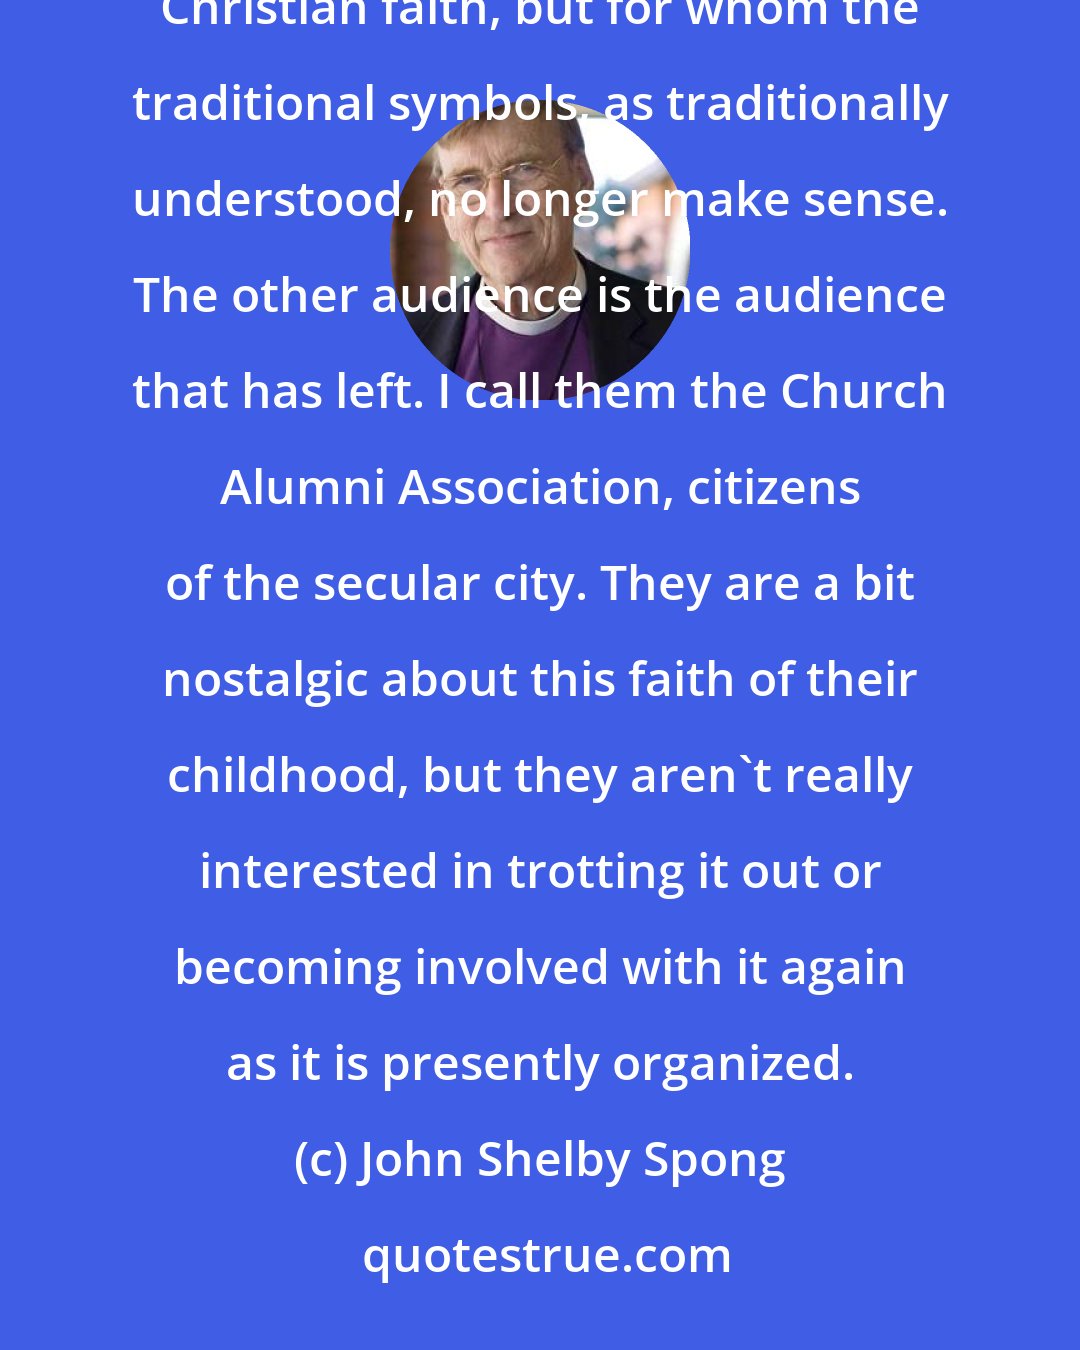 John Shelby Spong: My audience is made up of two groups of people. The first group includes people whose roots are deep in the Christian faith, but for whom the traditional symbols, as traditionally understood, no longer make sense. The other audience is the audience that has left. I call them the Church Alumni Association, citizens of the secular city. They are a bit nostalgic about this faith of their childhood, but they aren't really interested in trotting it out or becoming involved with it again as it is presently organized.